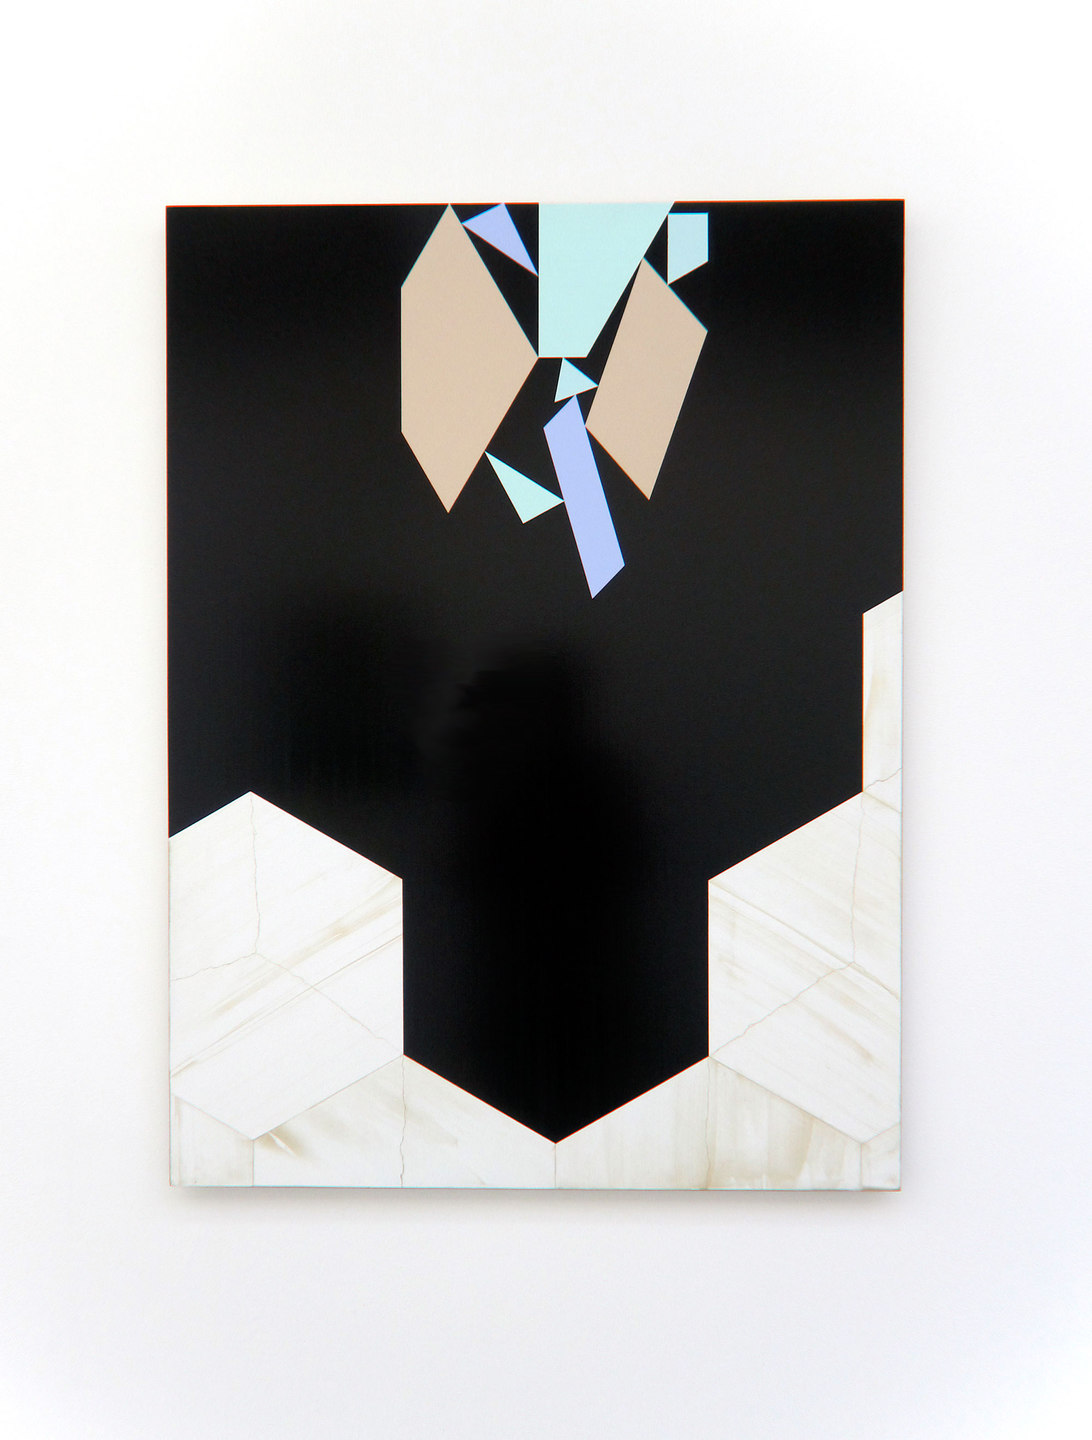 Andy Jackson, Set 5 (Magnetise), 2010, Acrylic and Metallic Acrylic on Board, (h.1155mm x w.835mm), Cell Project Space